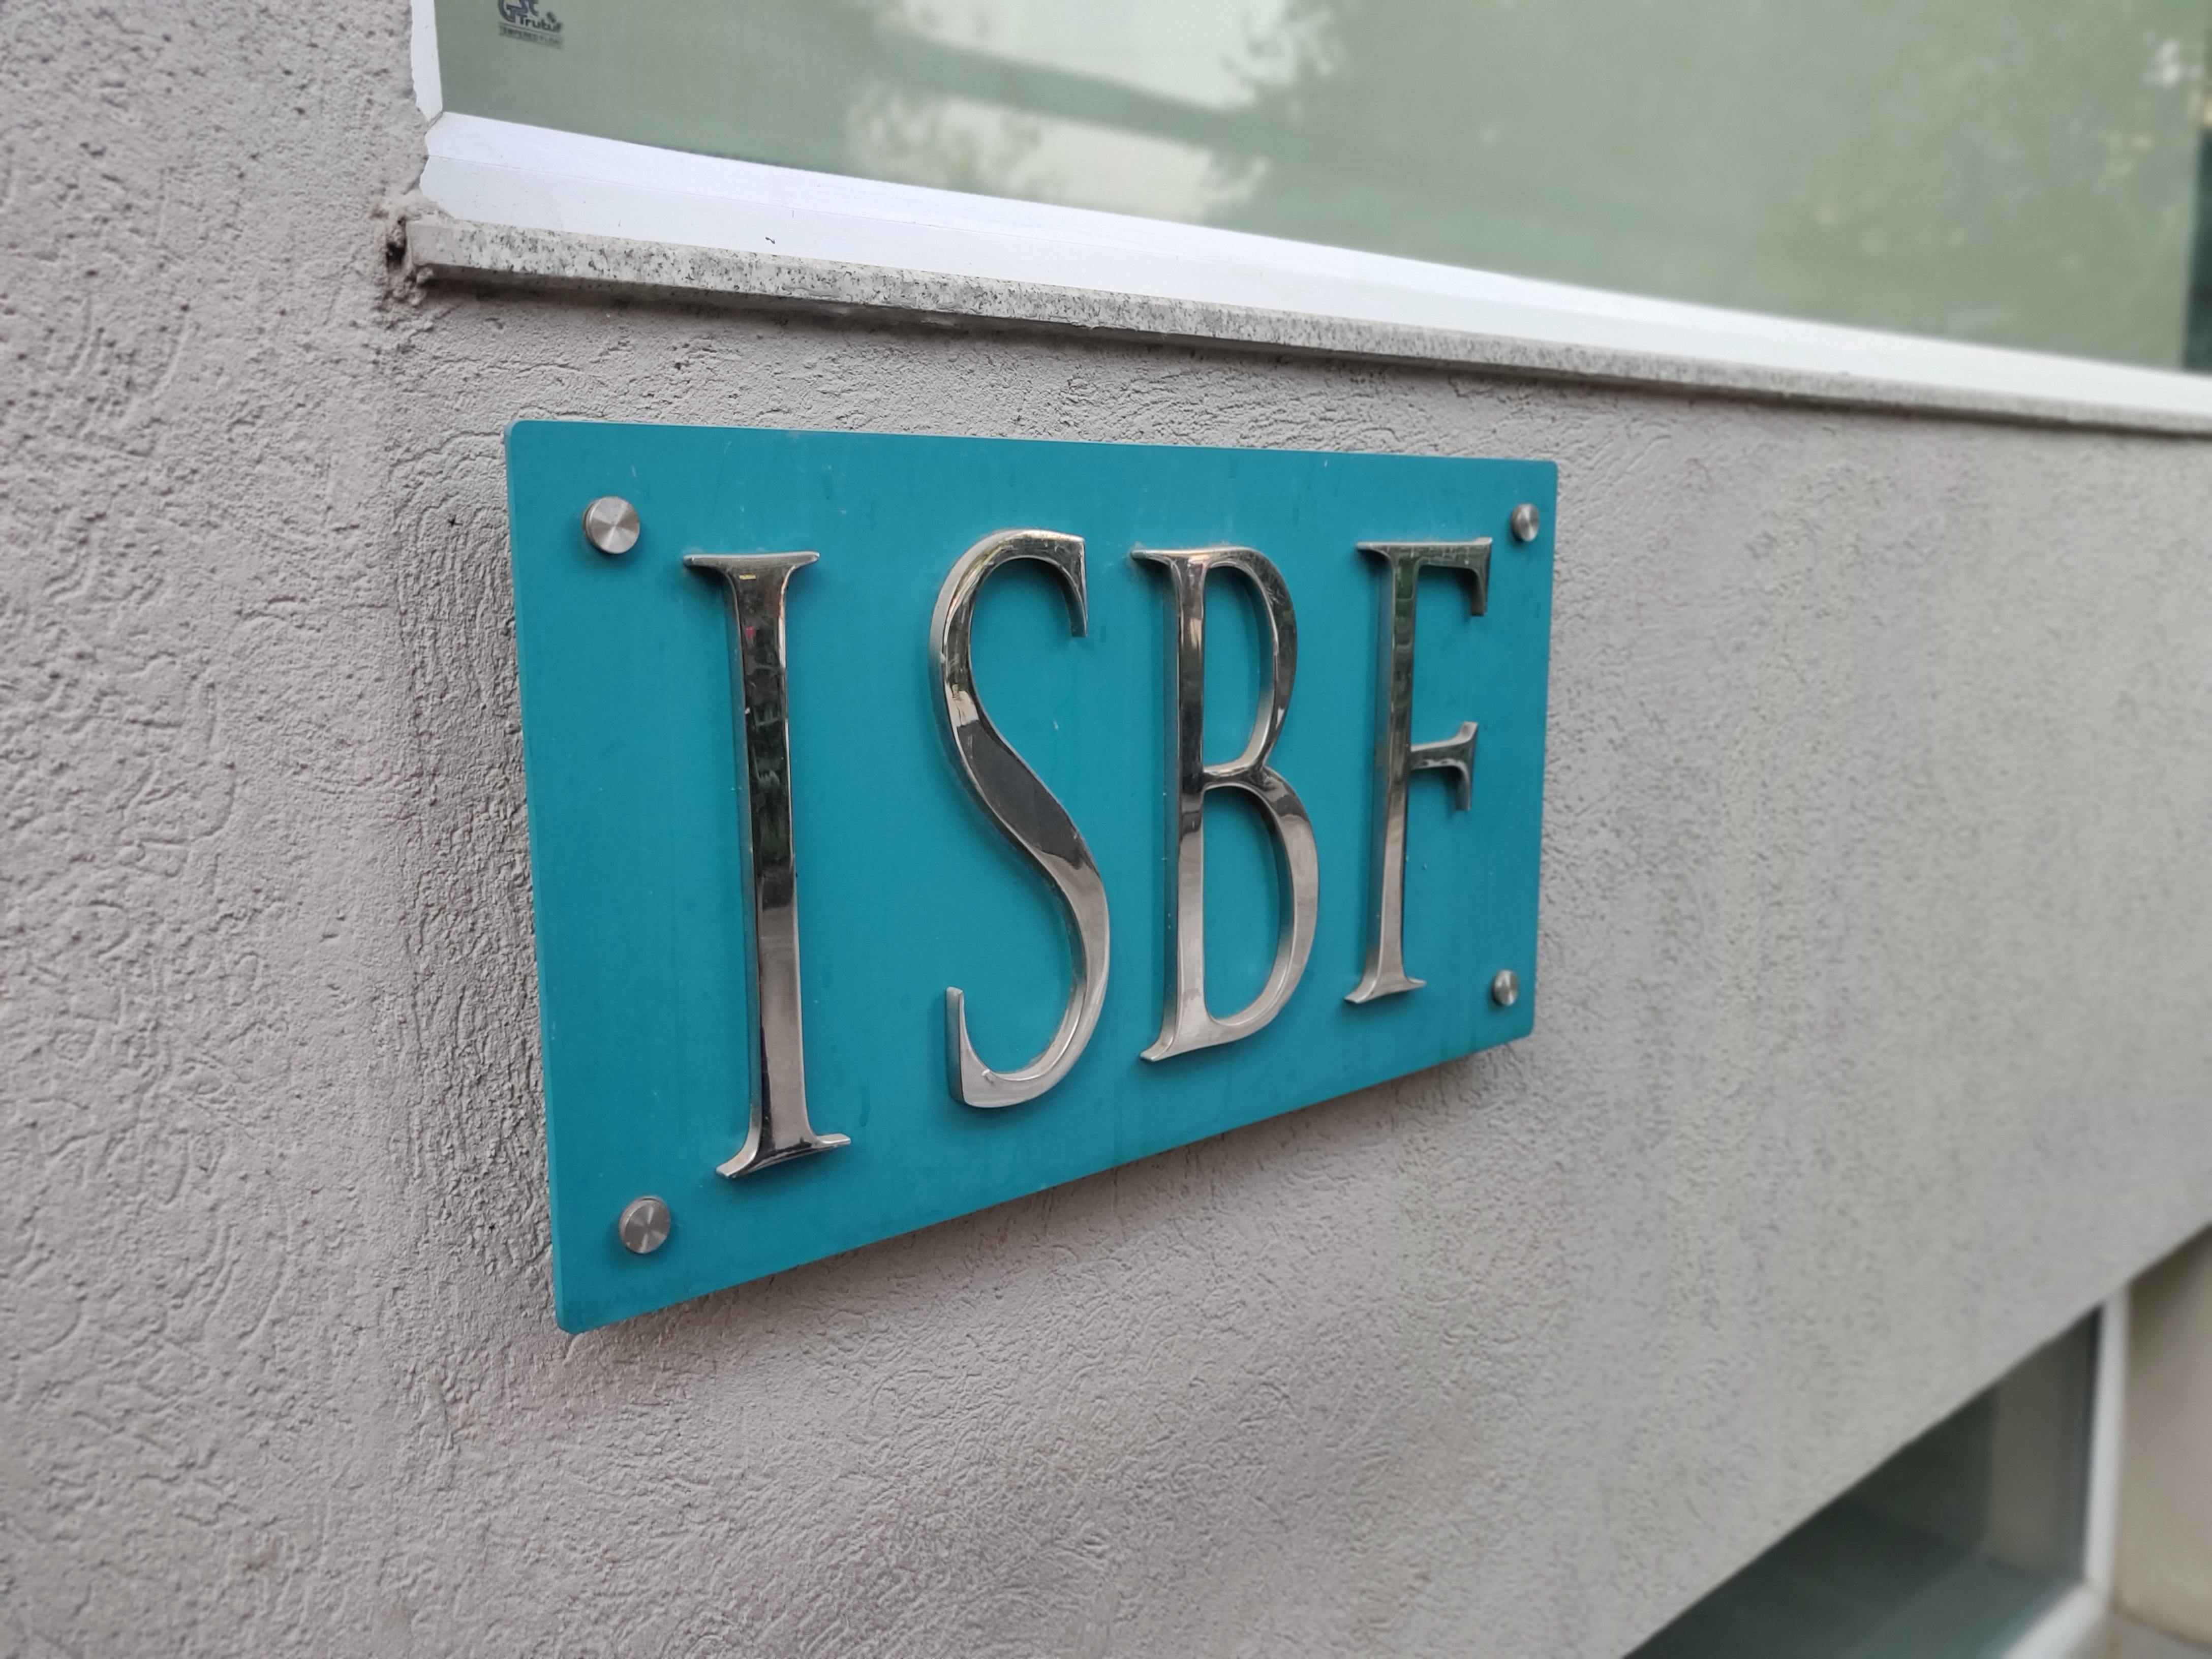 Indian School of Business and Finance (ISBF)